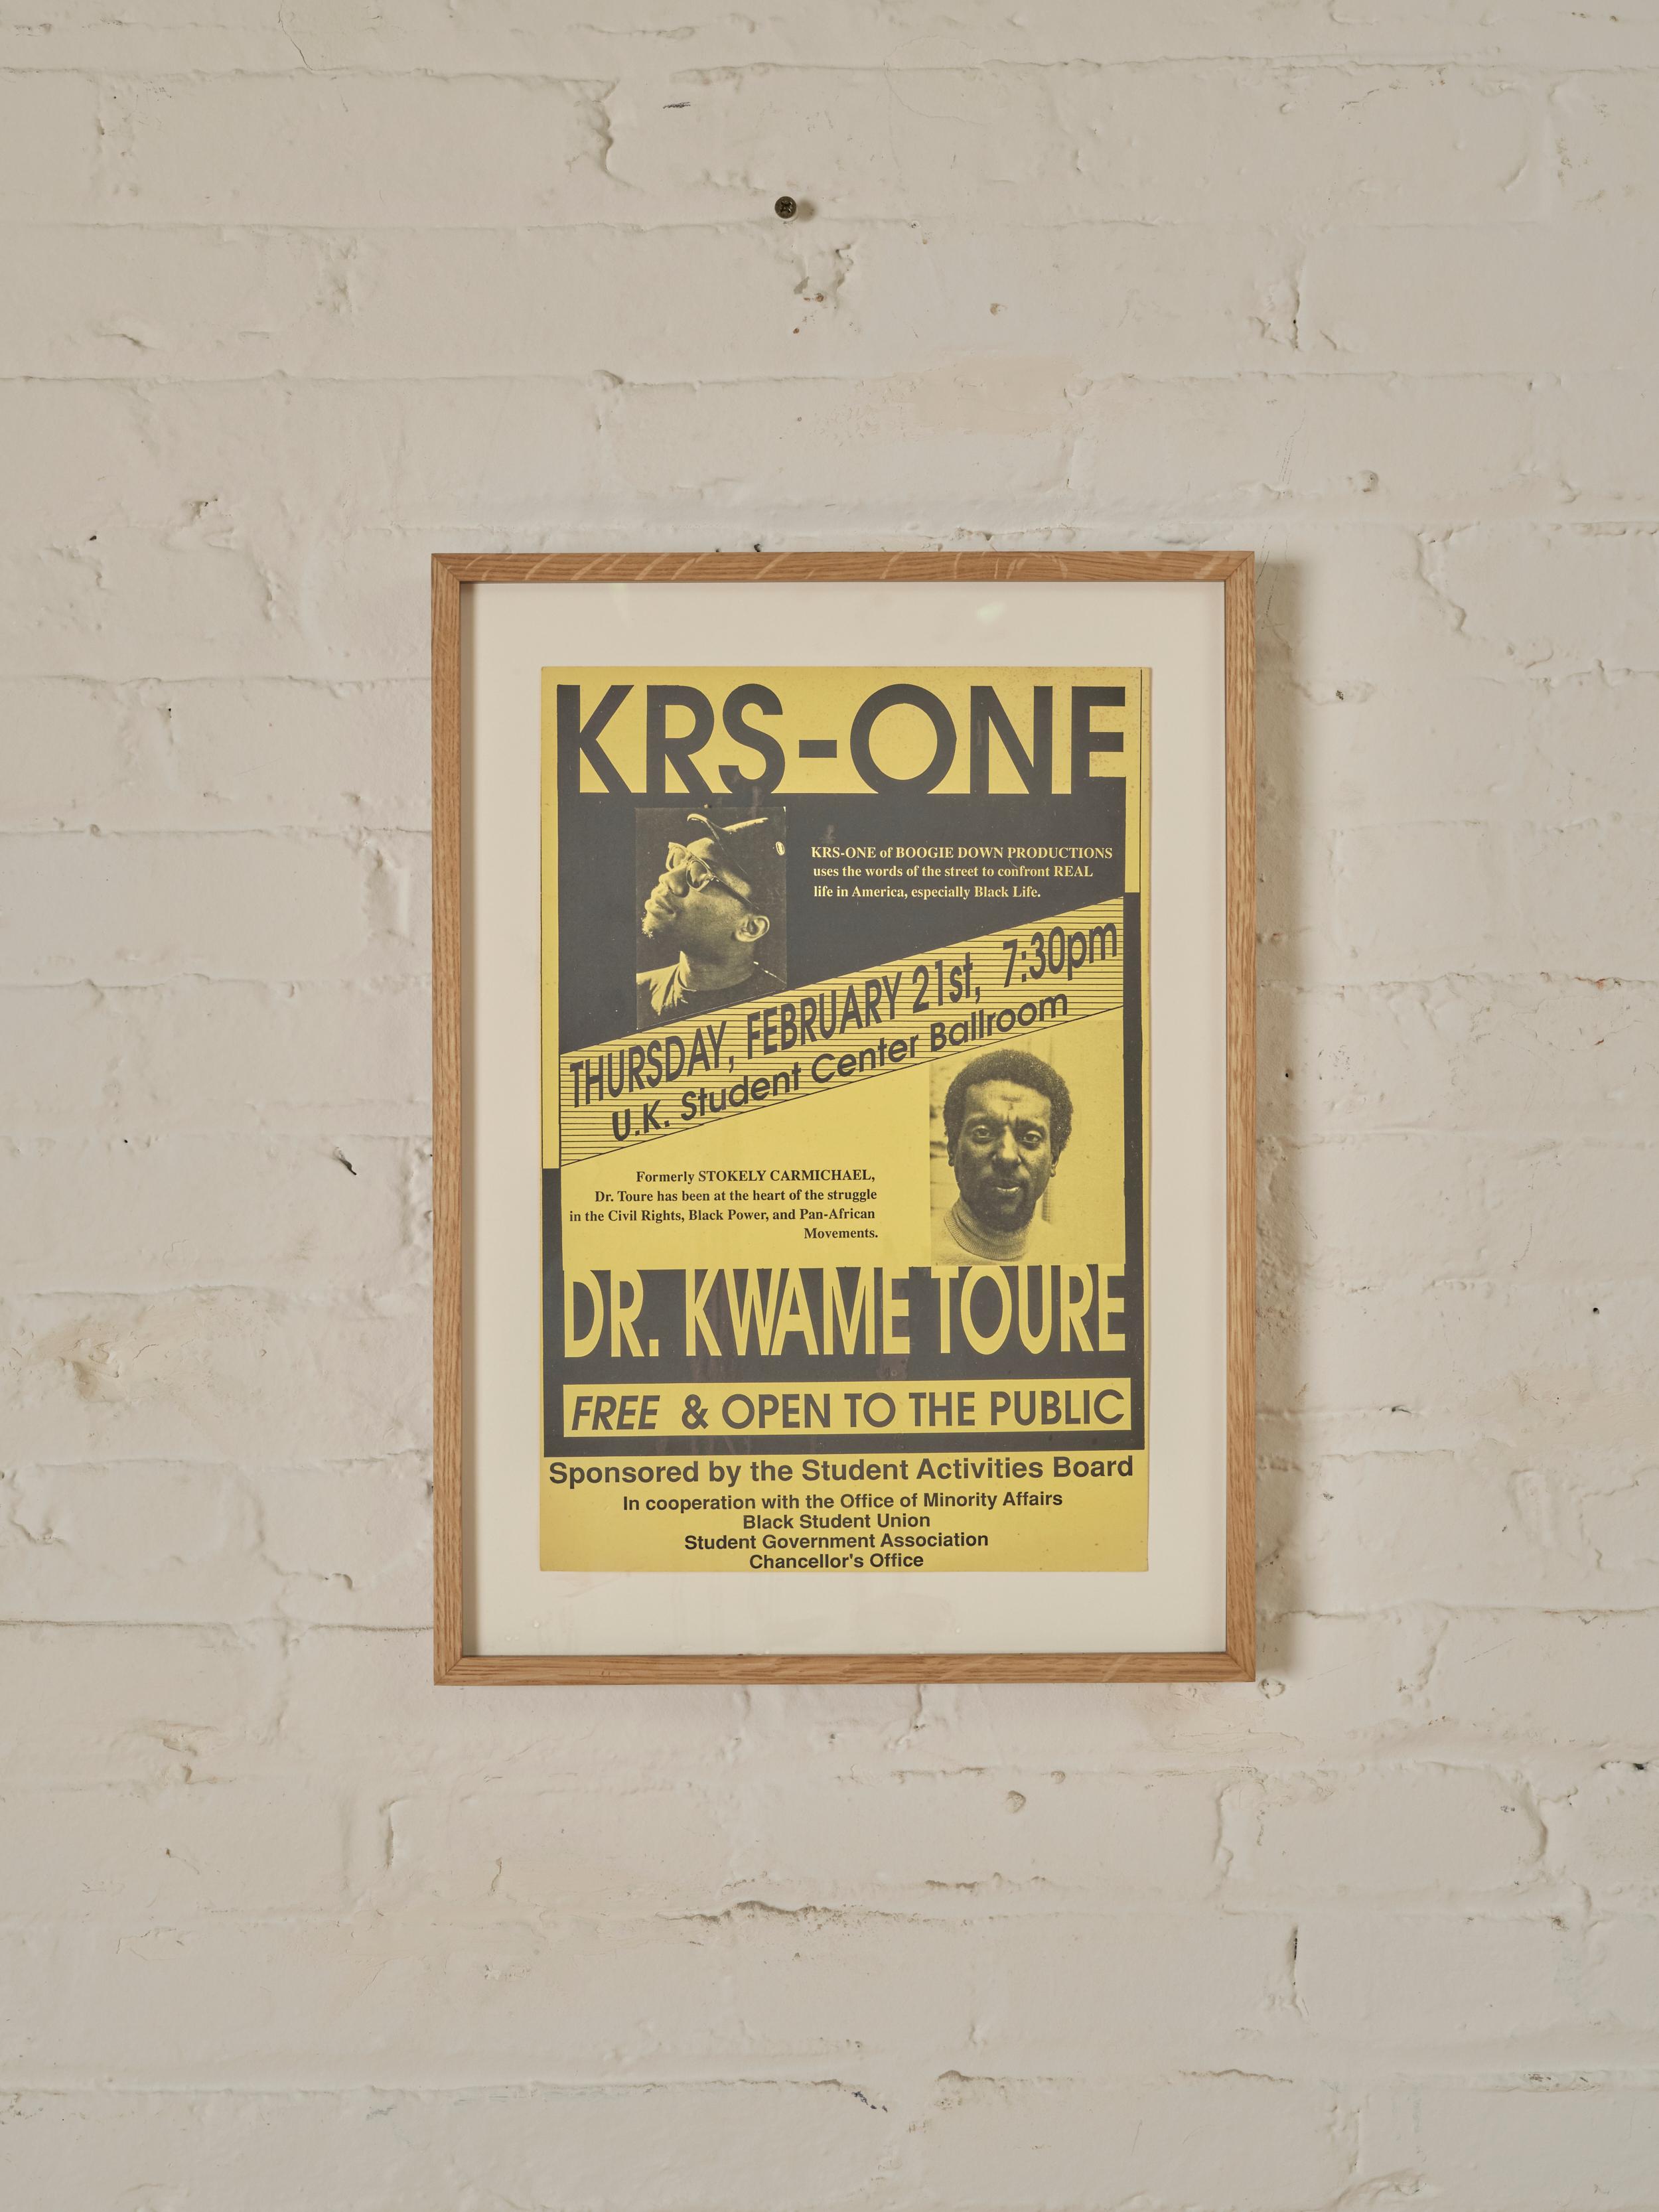 KRS - ONE and Dr. Kwame Ture Event Poster. They gathered at the University of Kentucky Student Center Ballroom with the Black Student Union to discuss life in America and the Pan-African movement.

